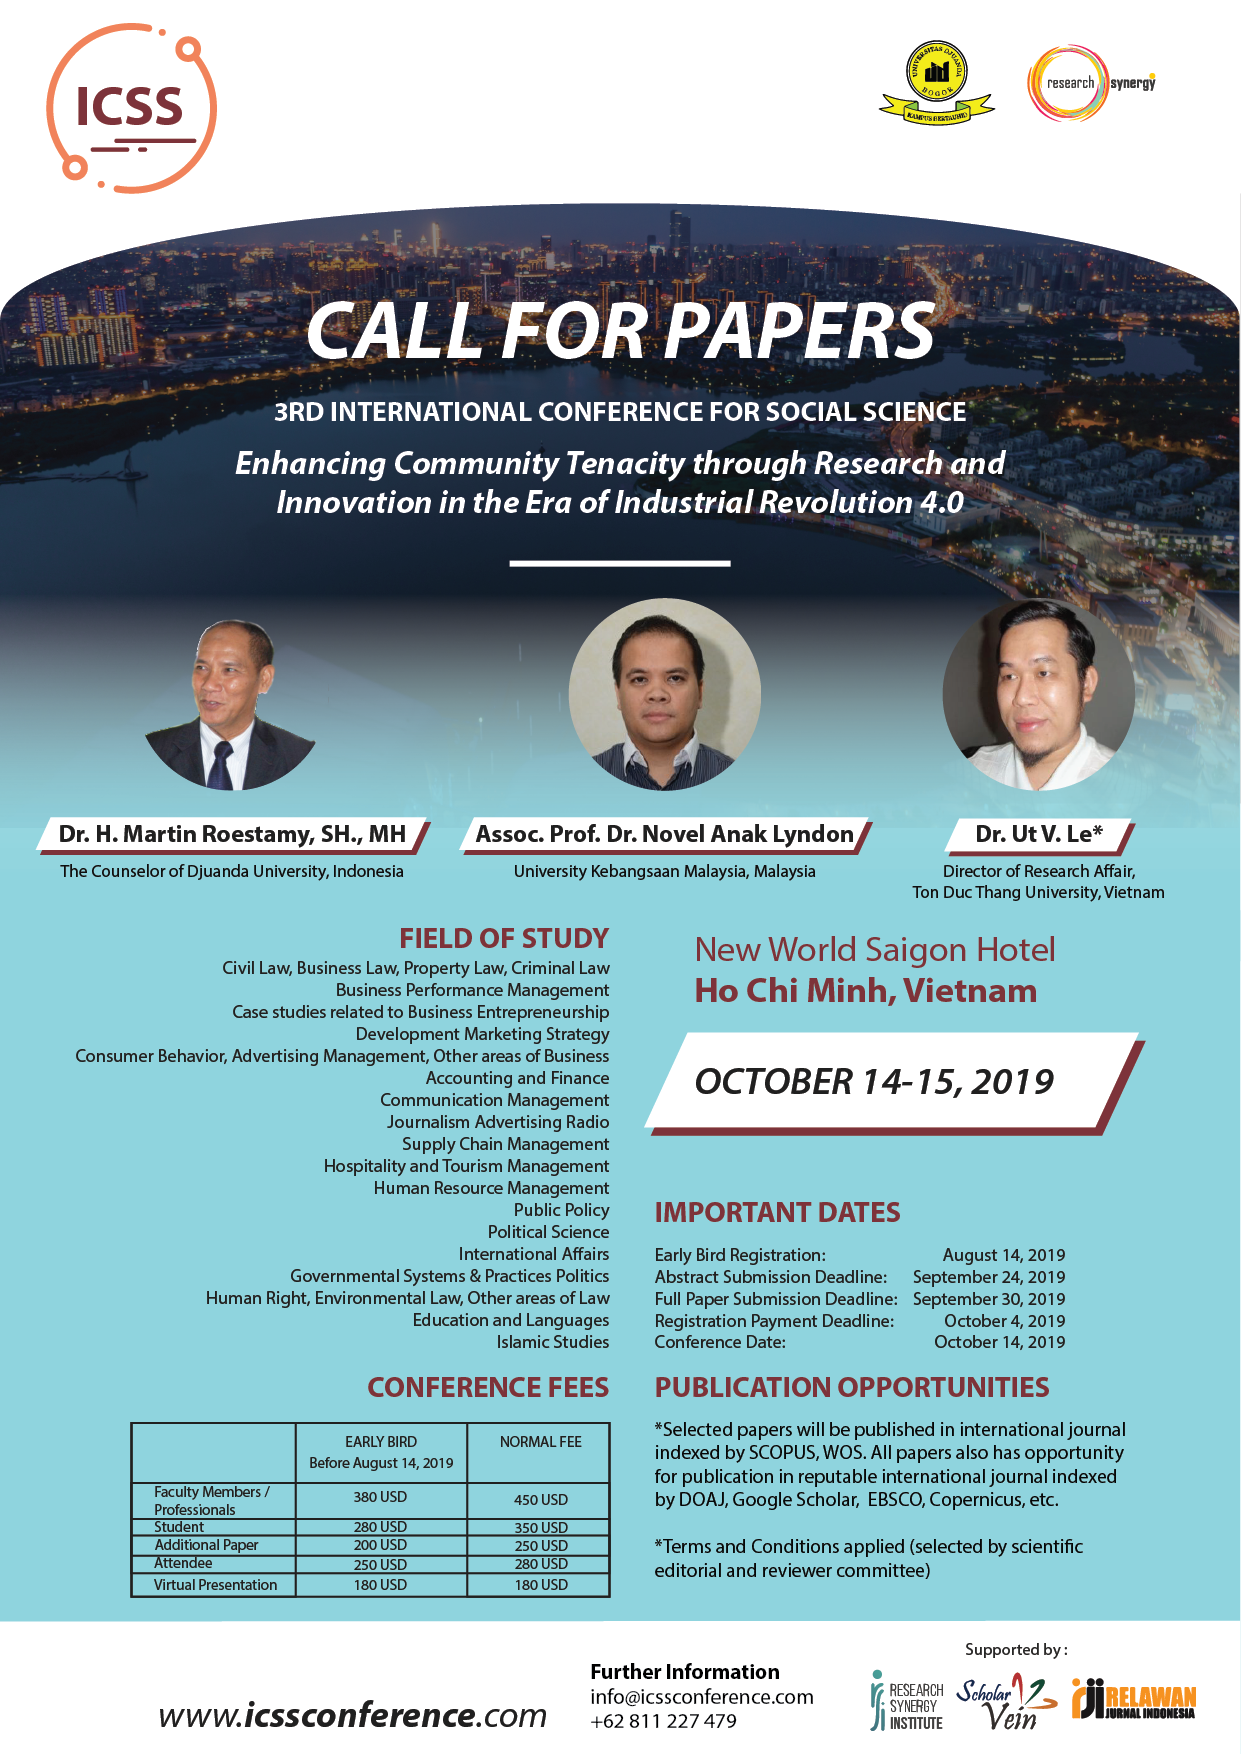 3rd International Conference for Social Science (ICSS)